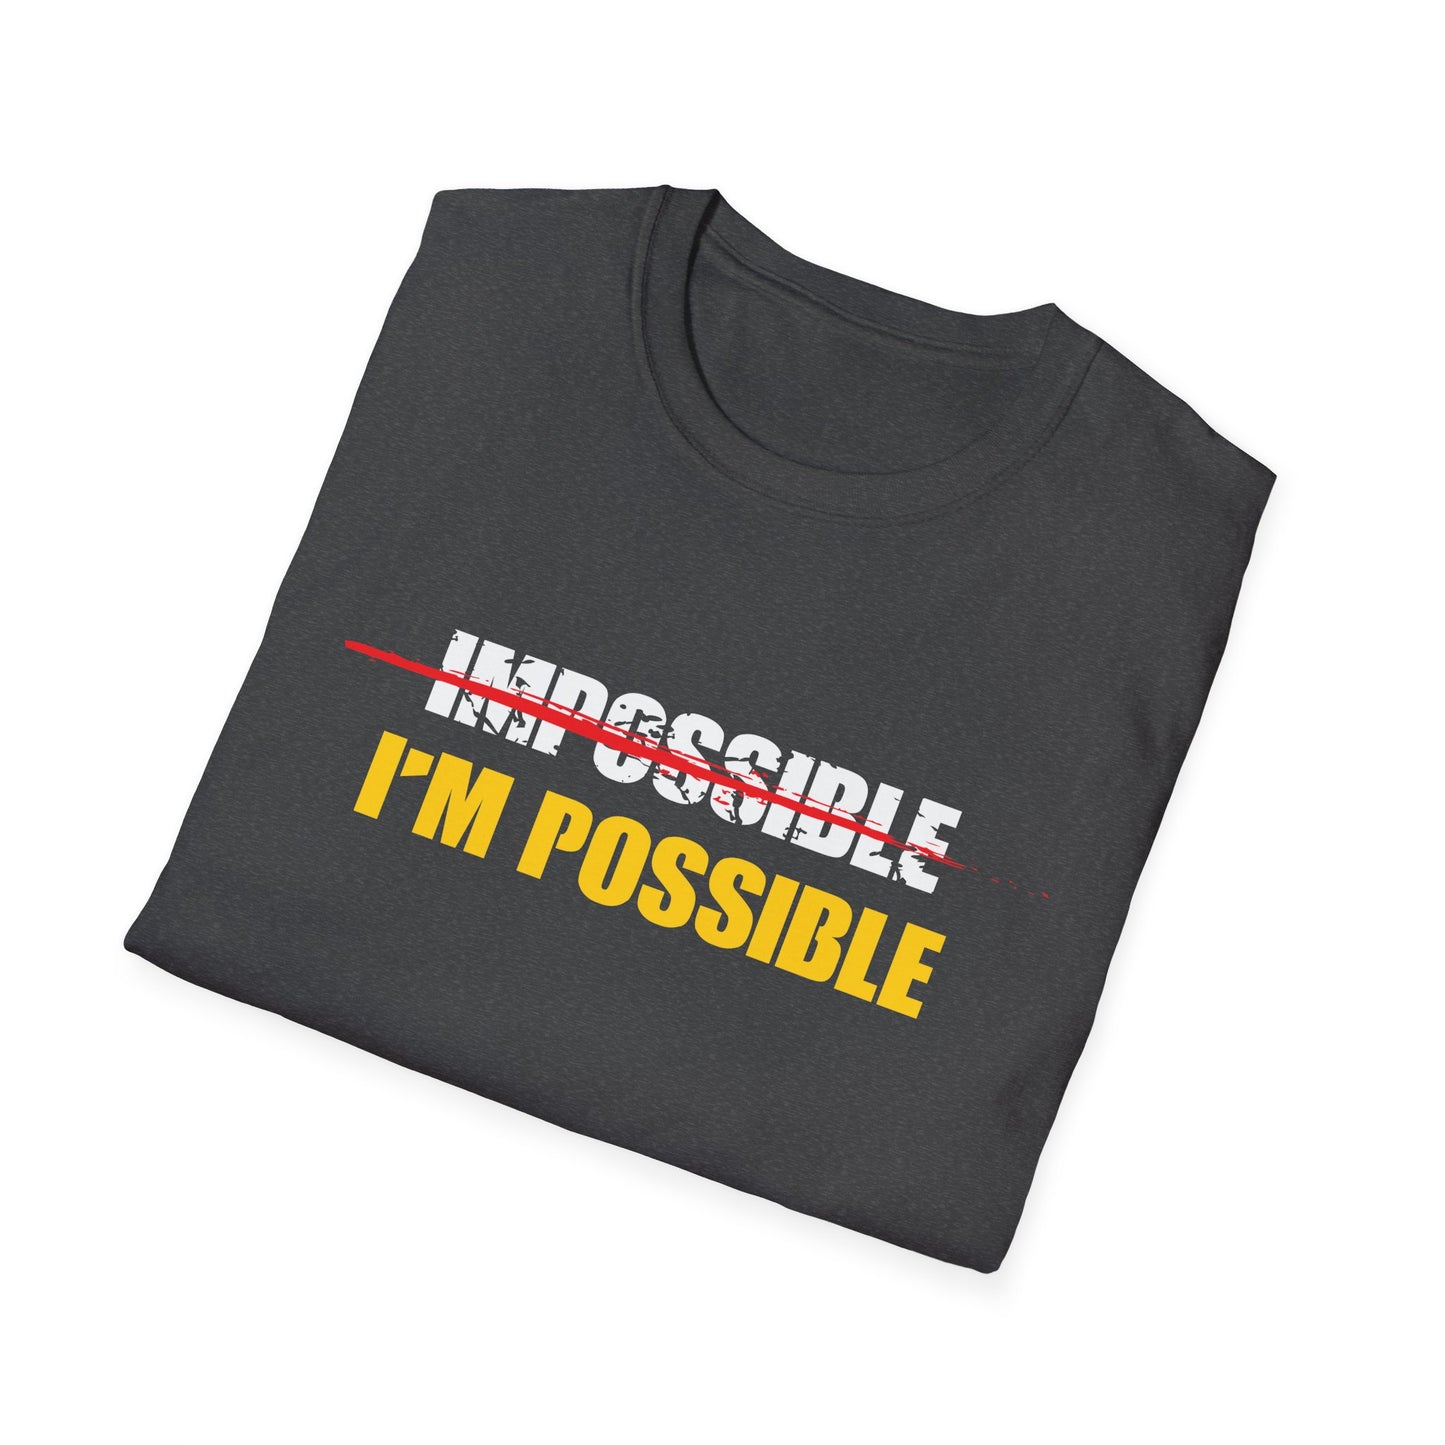 Impossible I'm possible Unisex Softstyle T-Shirt